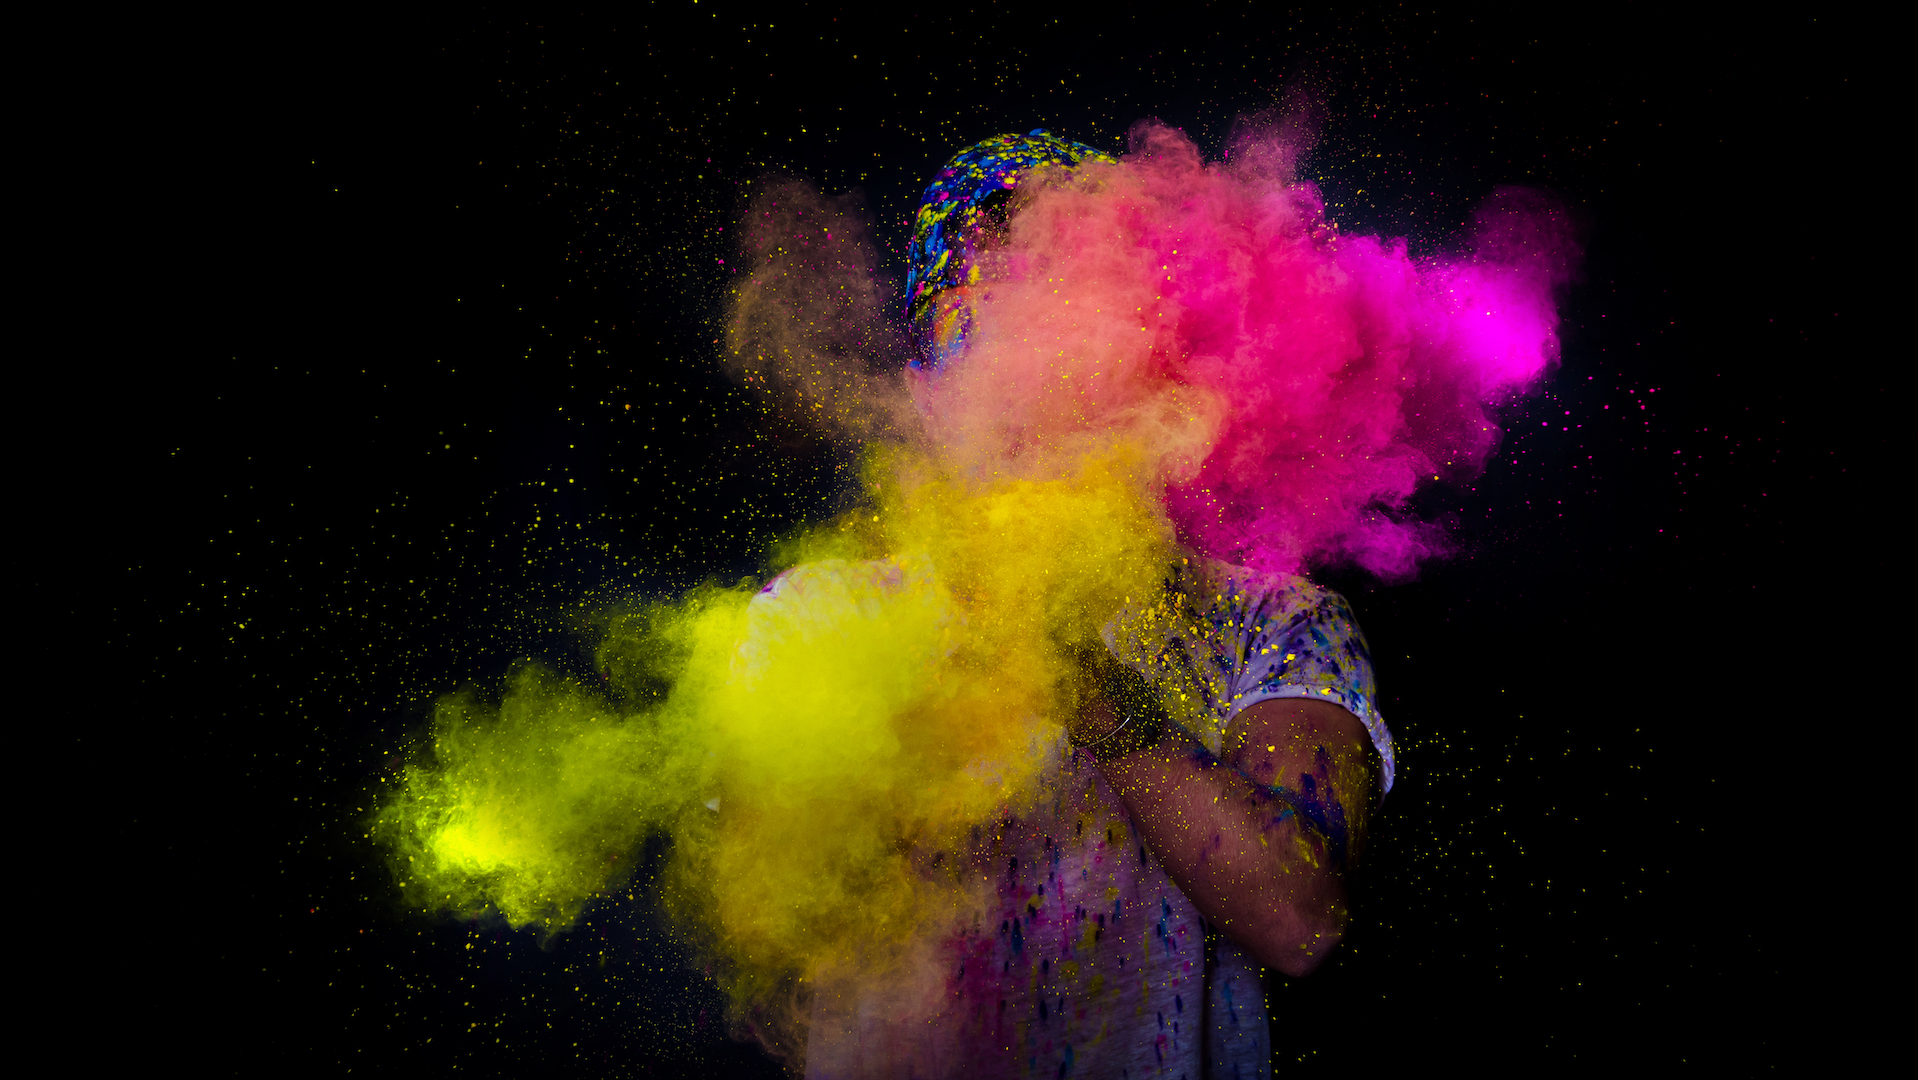 This week in Editors' Choice: Bold colors, action shots, and one-eyed subjects